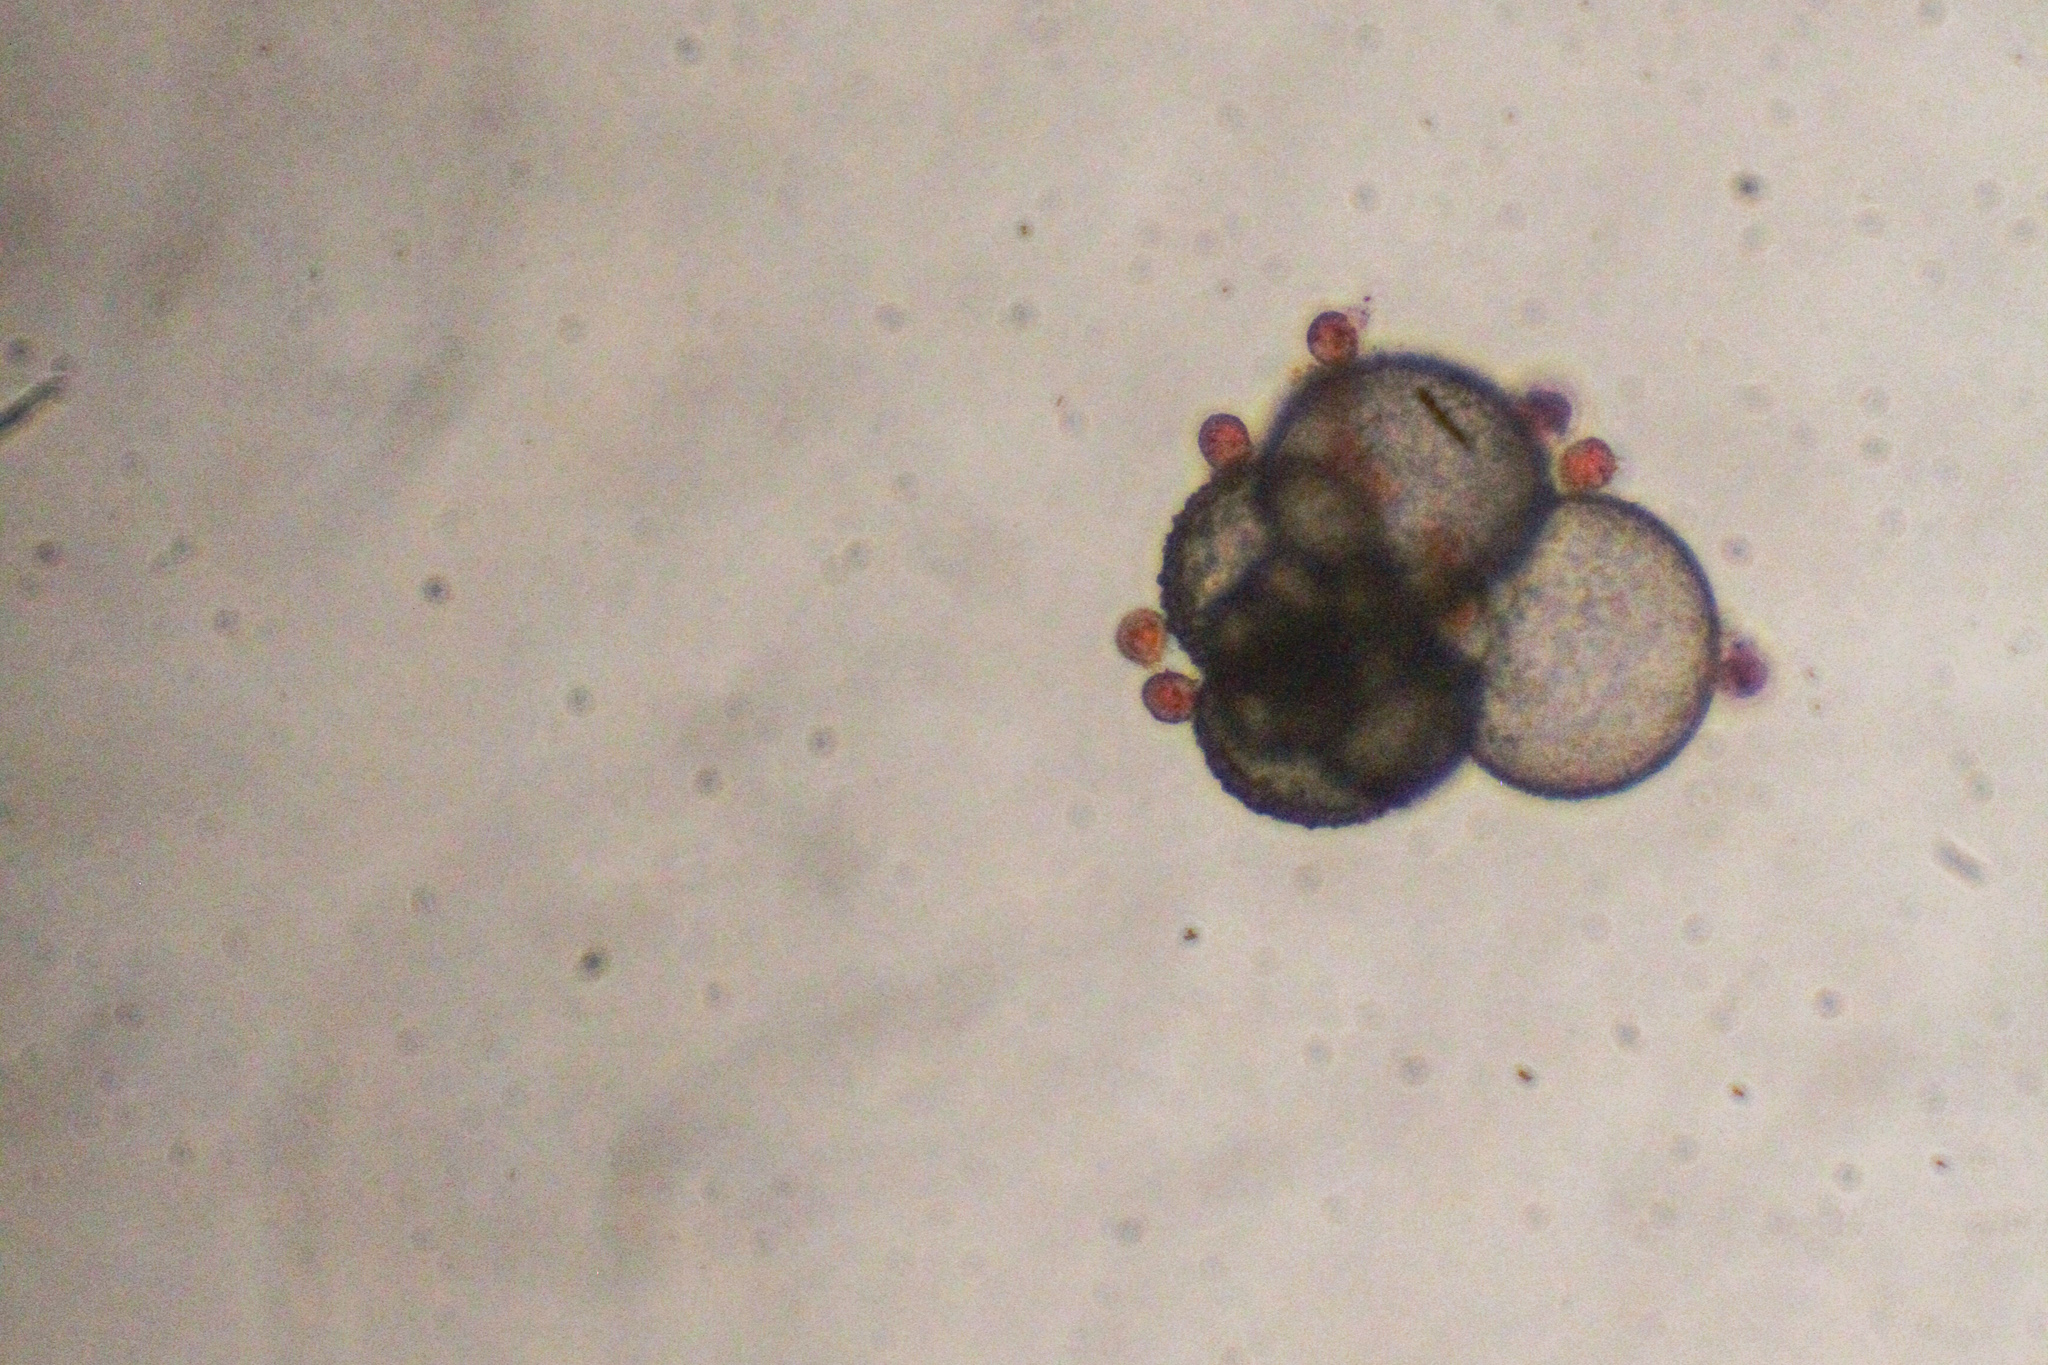 empty mother foraminifera shell surrounded by her smaller reddish offspring foraminifera